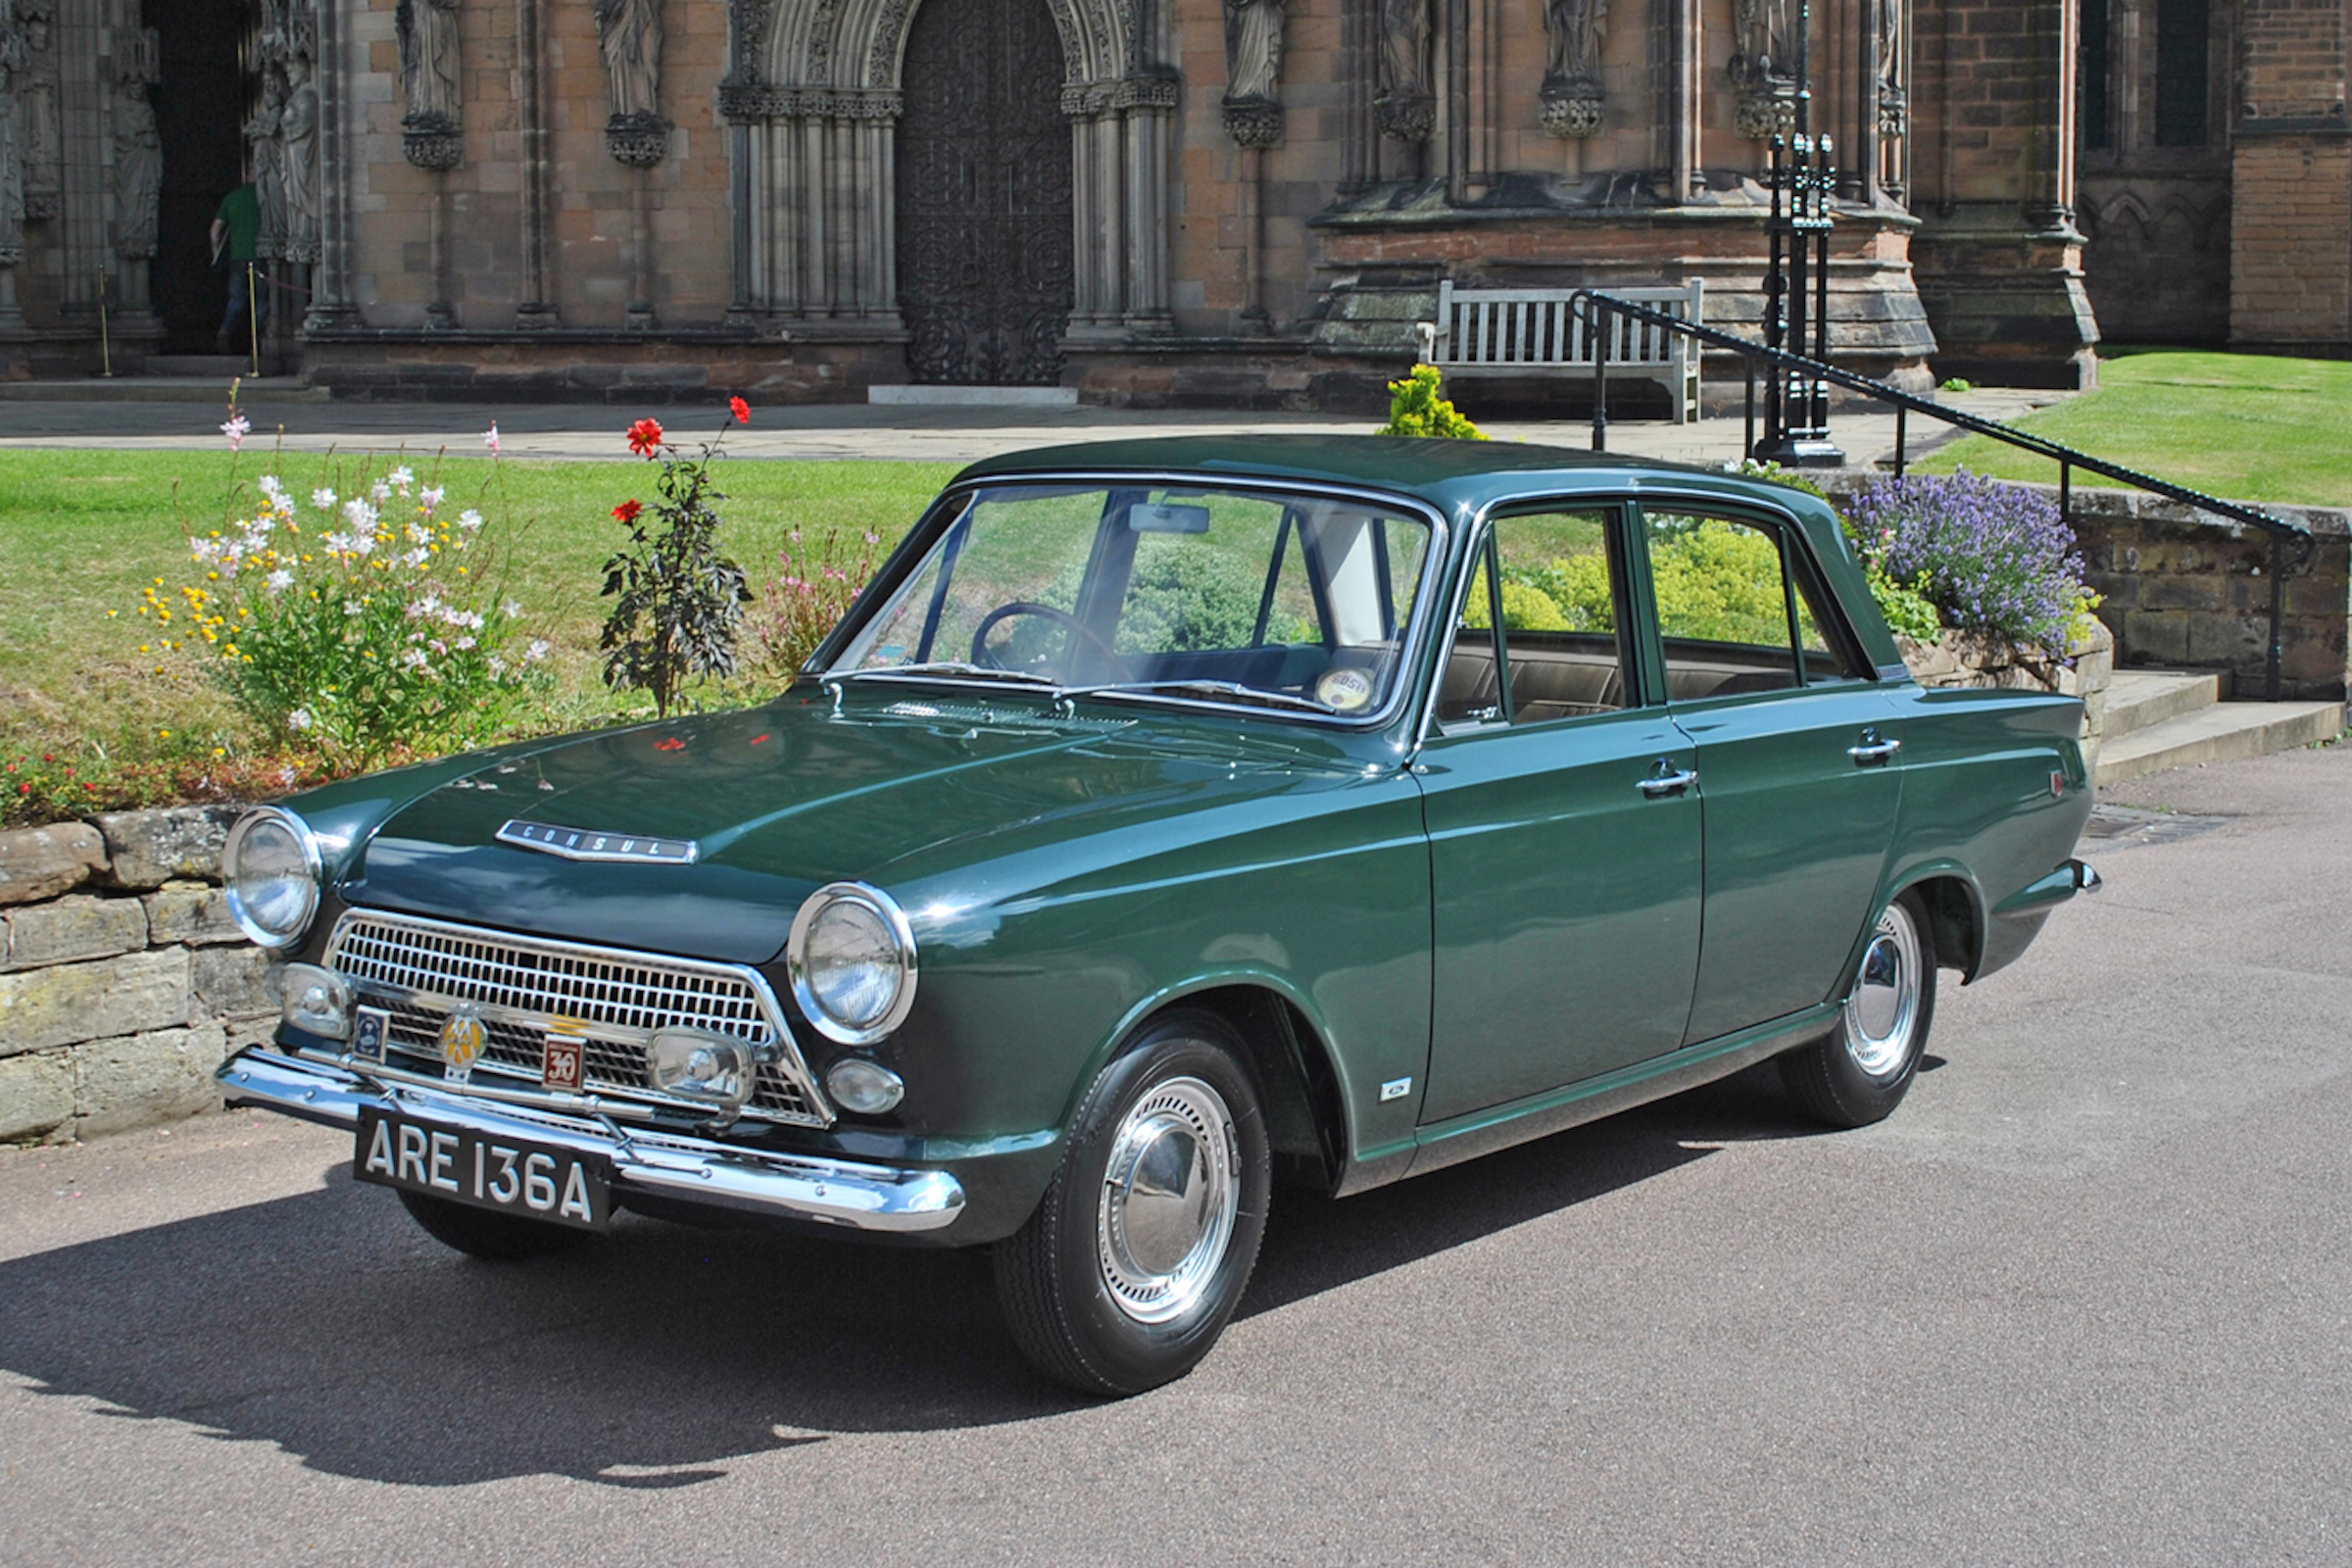 Ford Cortina Mk1: Buying guide and review (1962-1966 